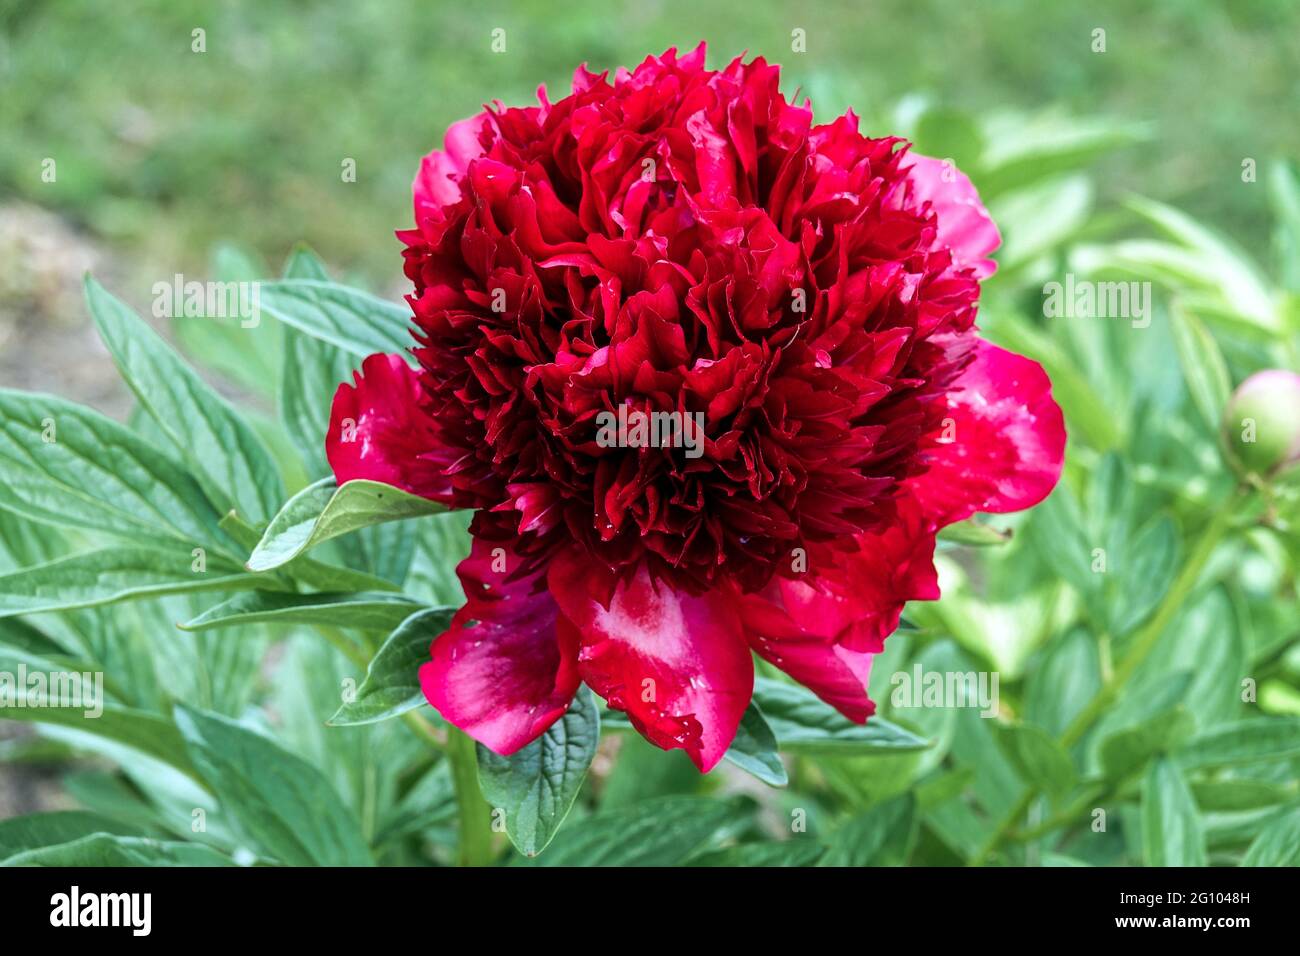 Peony 'Red Charm' Bowl of Large Flower Deep Red Petals Peony Red Charm flower Peony Flowering Blooms Spring Garden Flowers Blooming Paeonia Red Charm Stock Photo